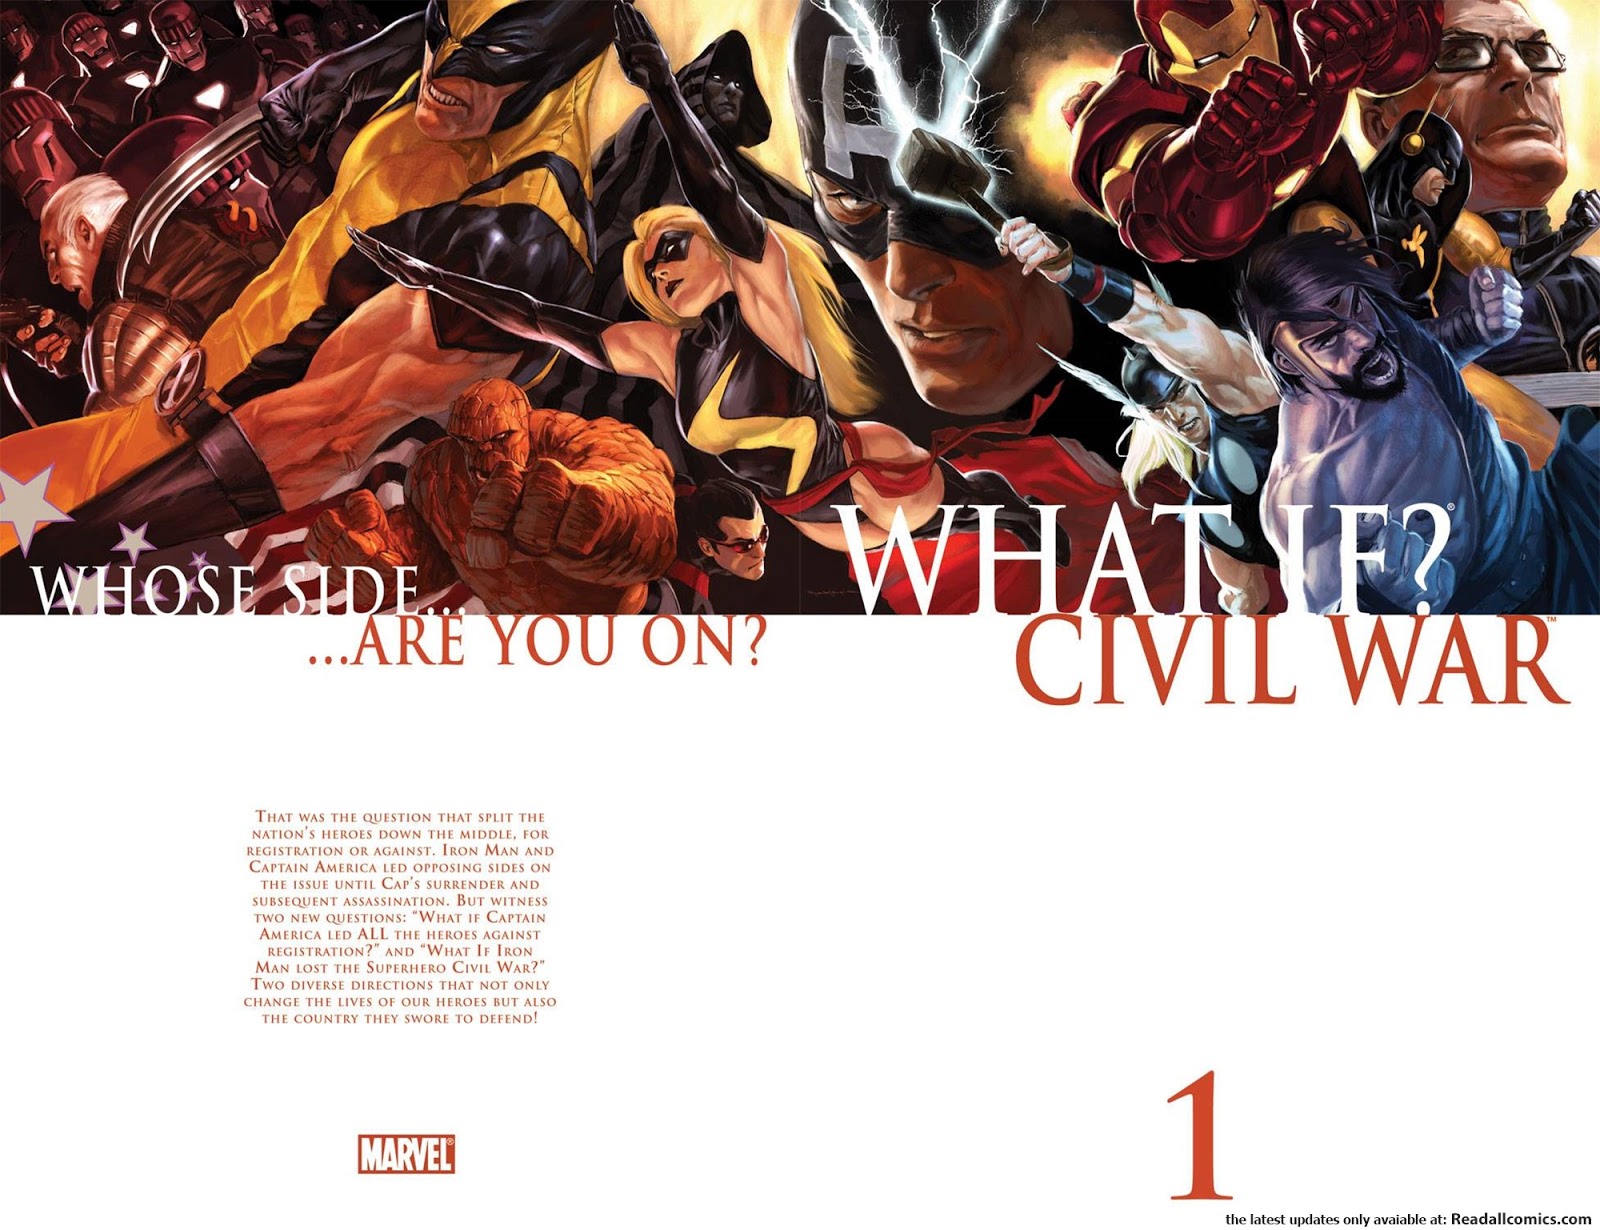 What If Civil War 001 2007 Read What If Civil War 001 2007 Comic Online In High Quality Read Full Comic Online For Free Read Comics Online In High Quality Viewcomiconline Com